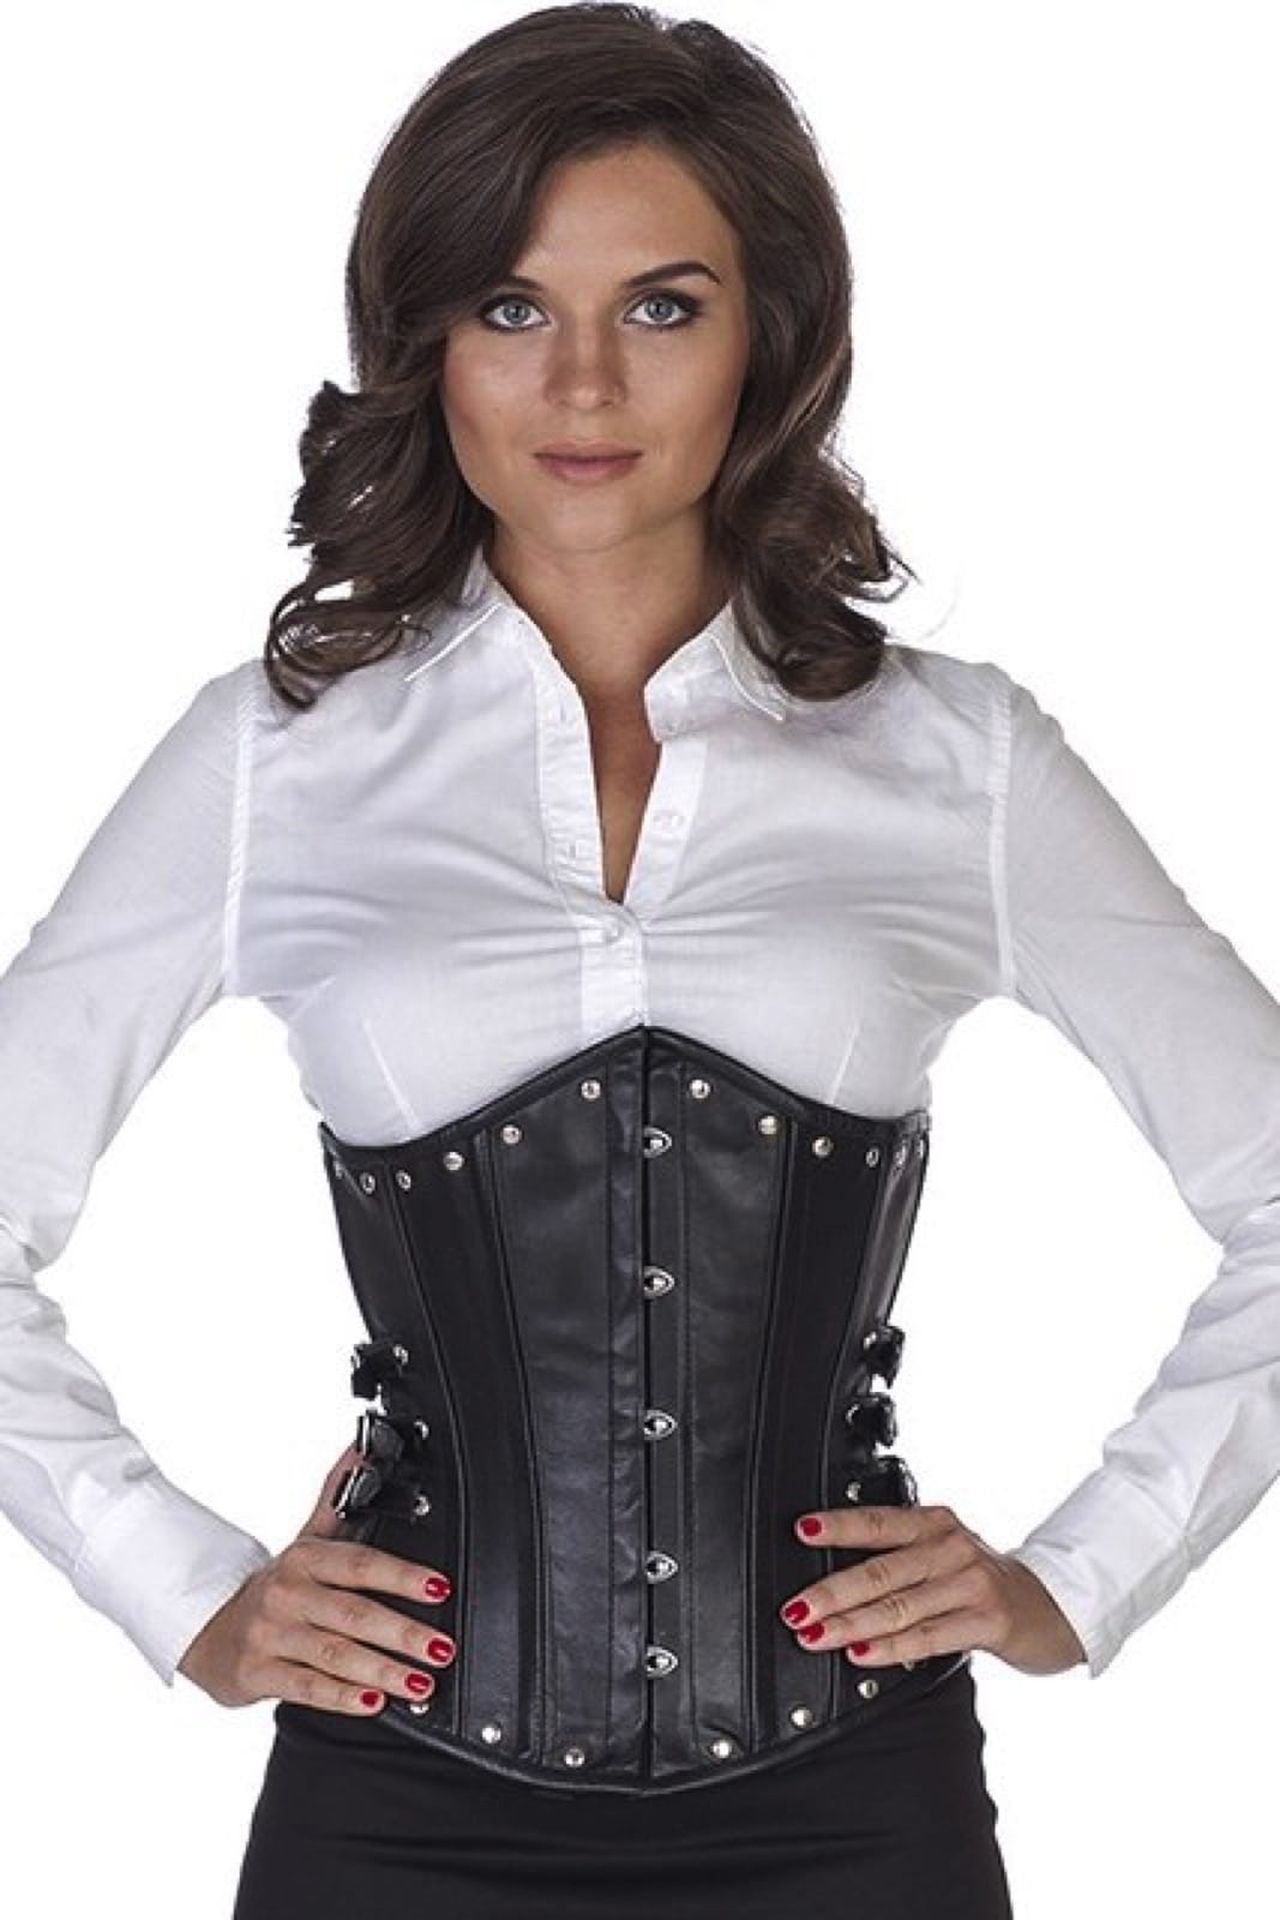 Corset black leather underbust with rivets and side buckles lg20